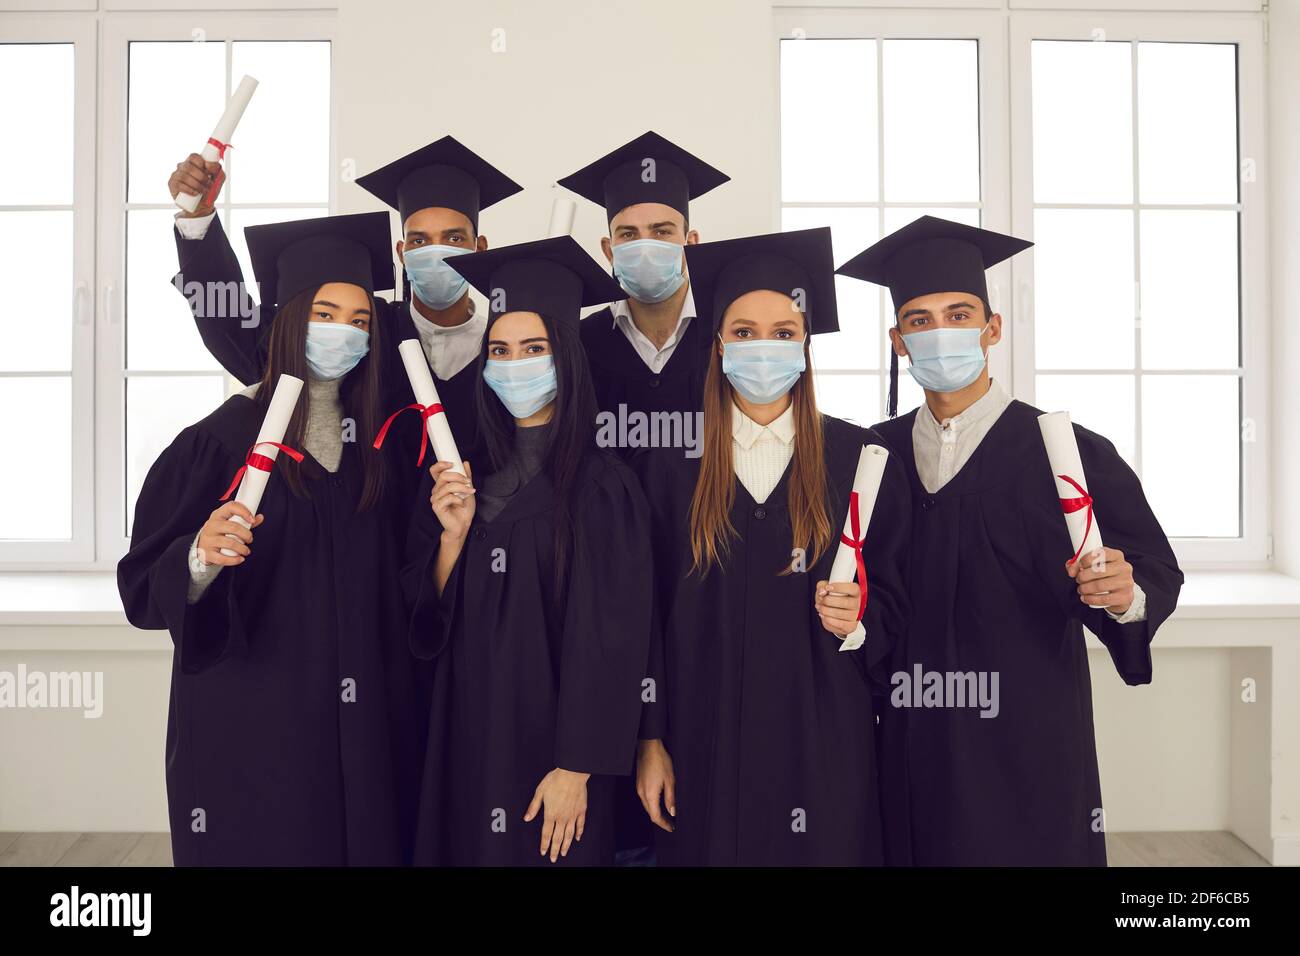 Group portrait of mixed-race university graduates in face masks holding their diplomas Stock Photo